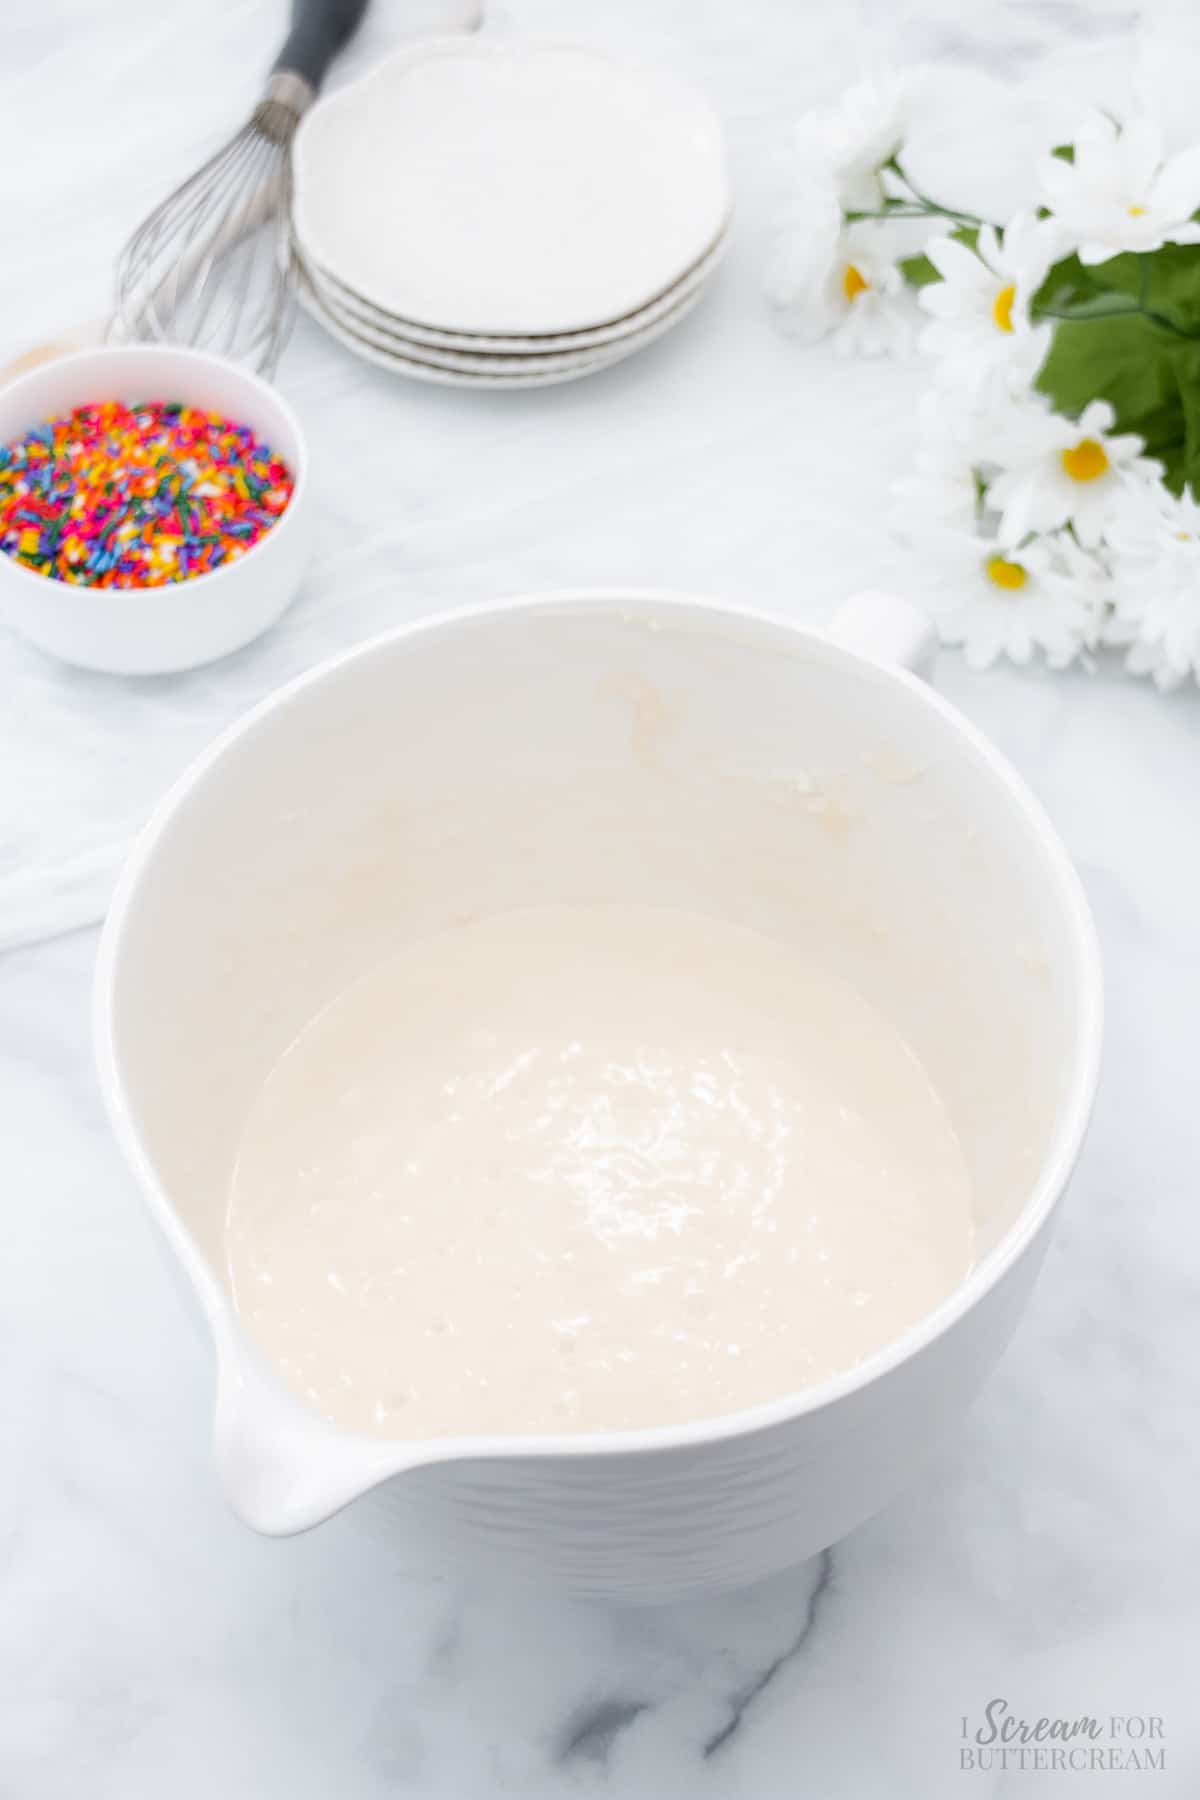 Mixed cake batter in a white bowl.